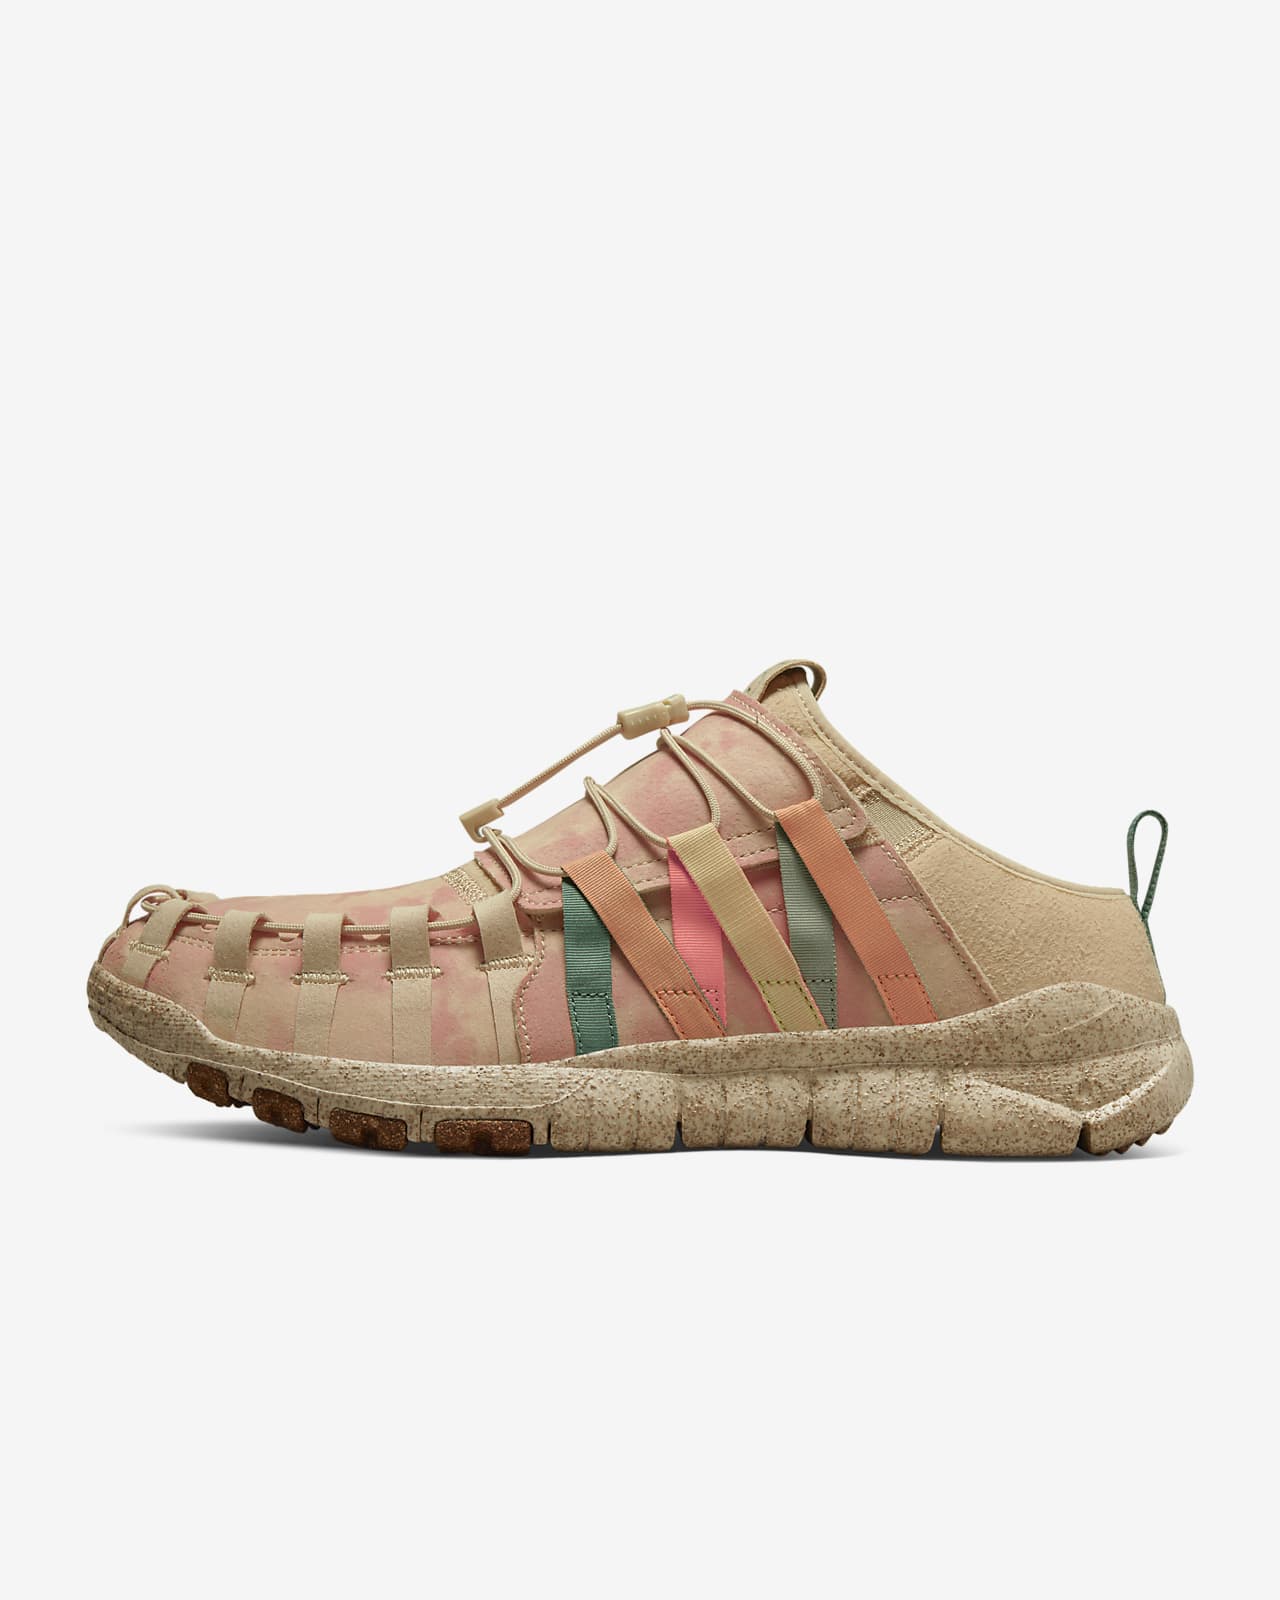 Nike Free Crater Trail Moc N7 Shoes